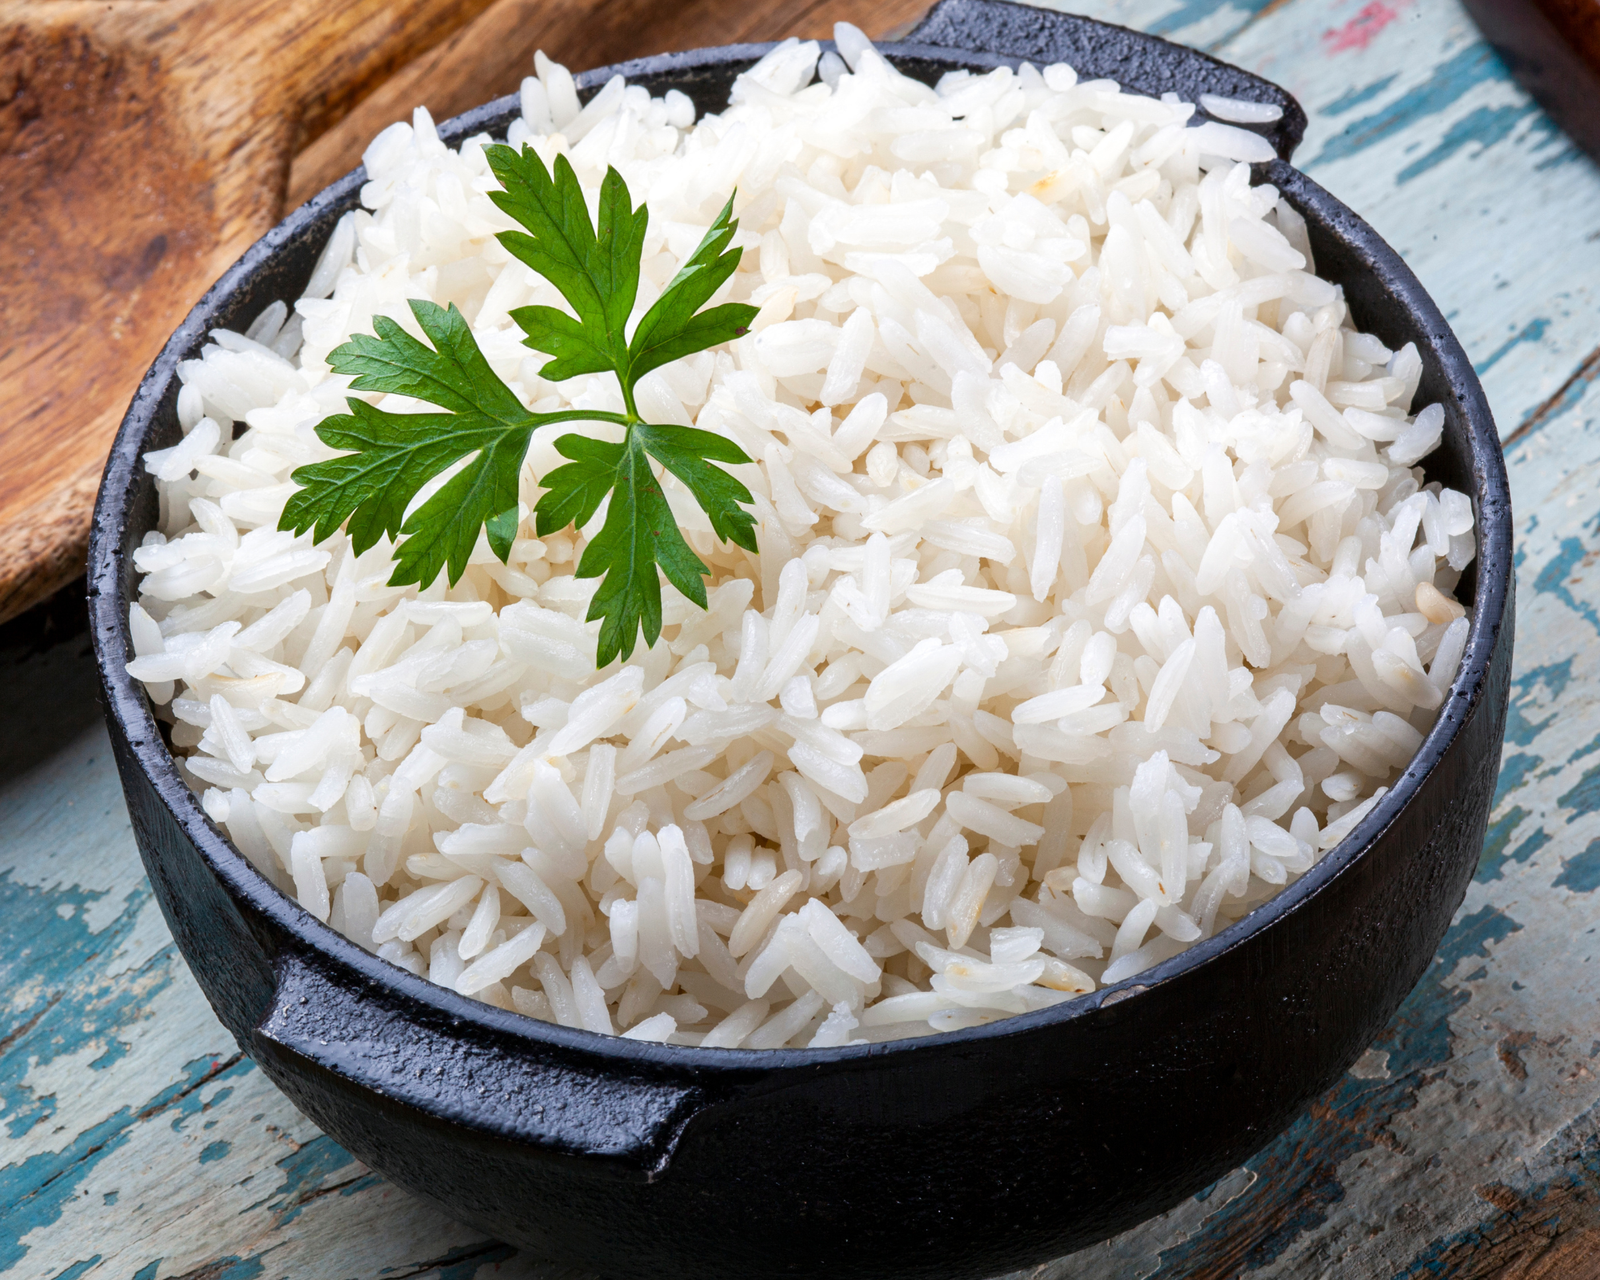 What's The Best Way To Cook Rice For Fluffy And Separate Grains?